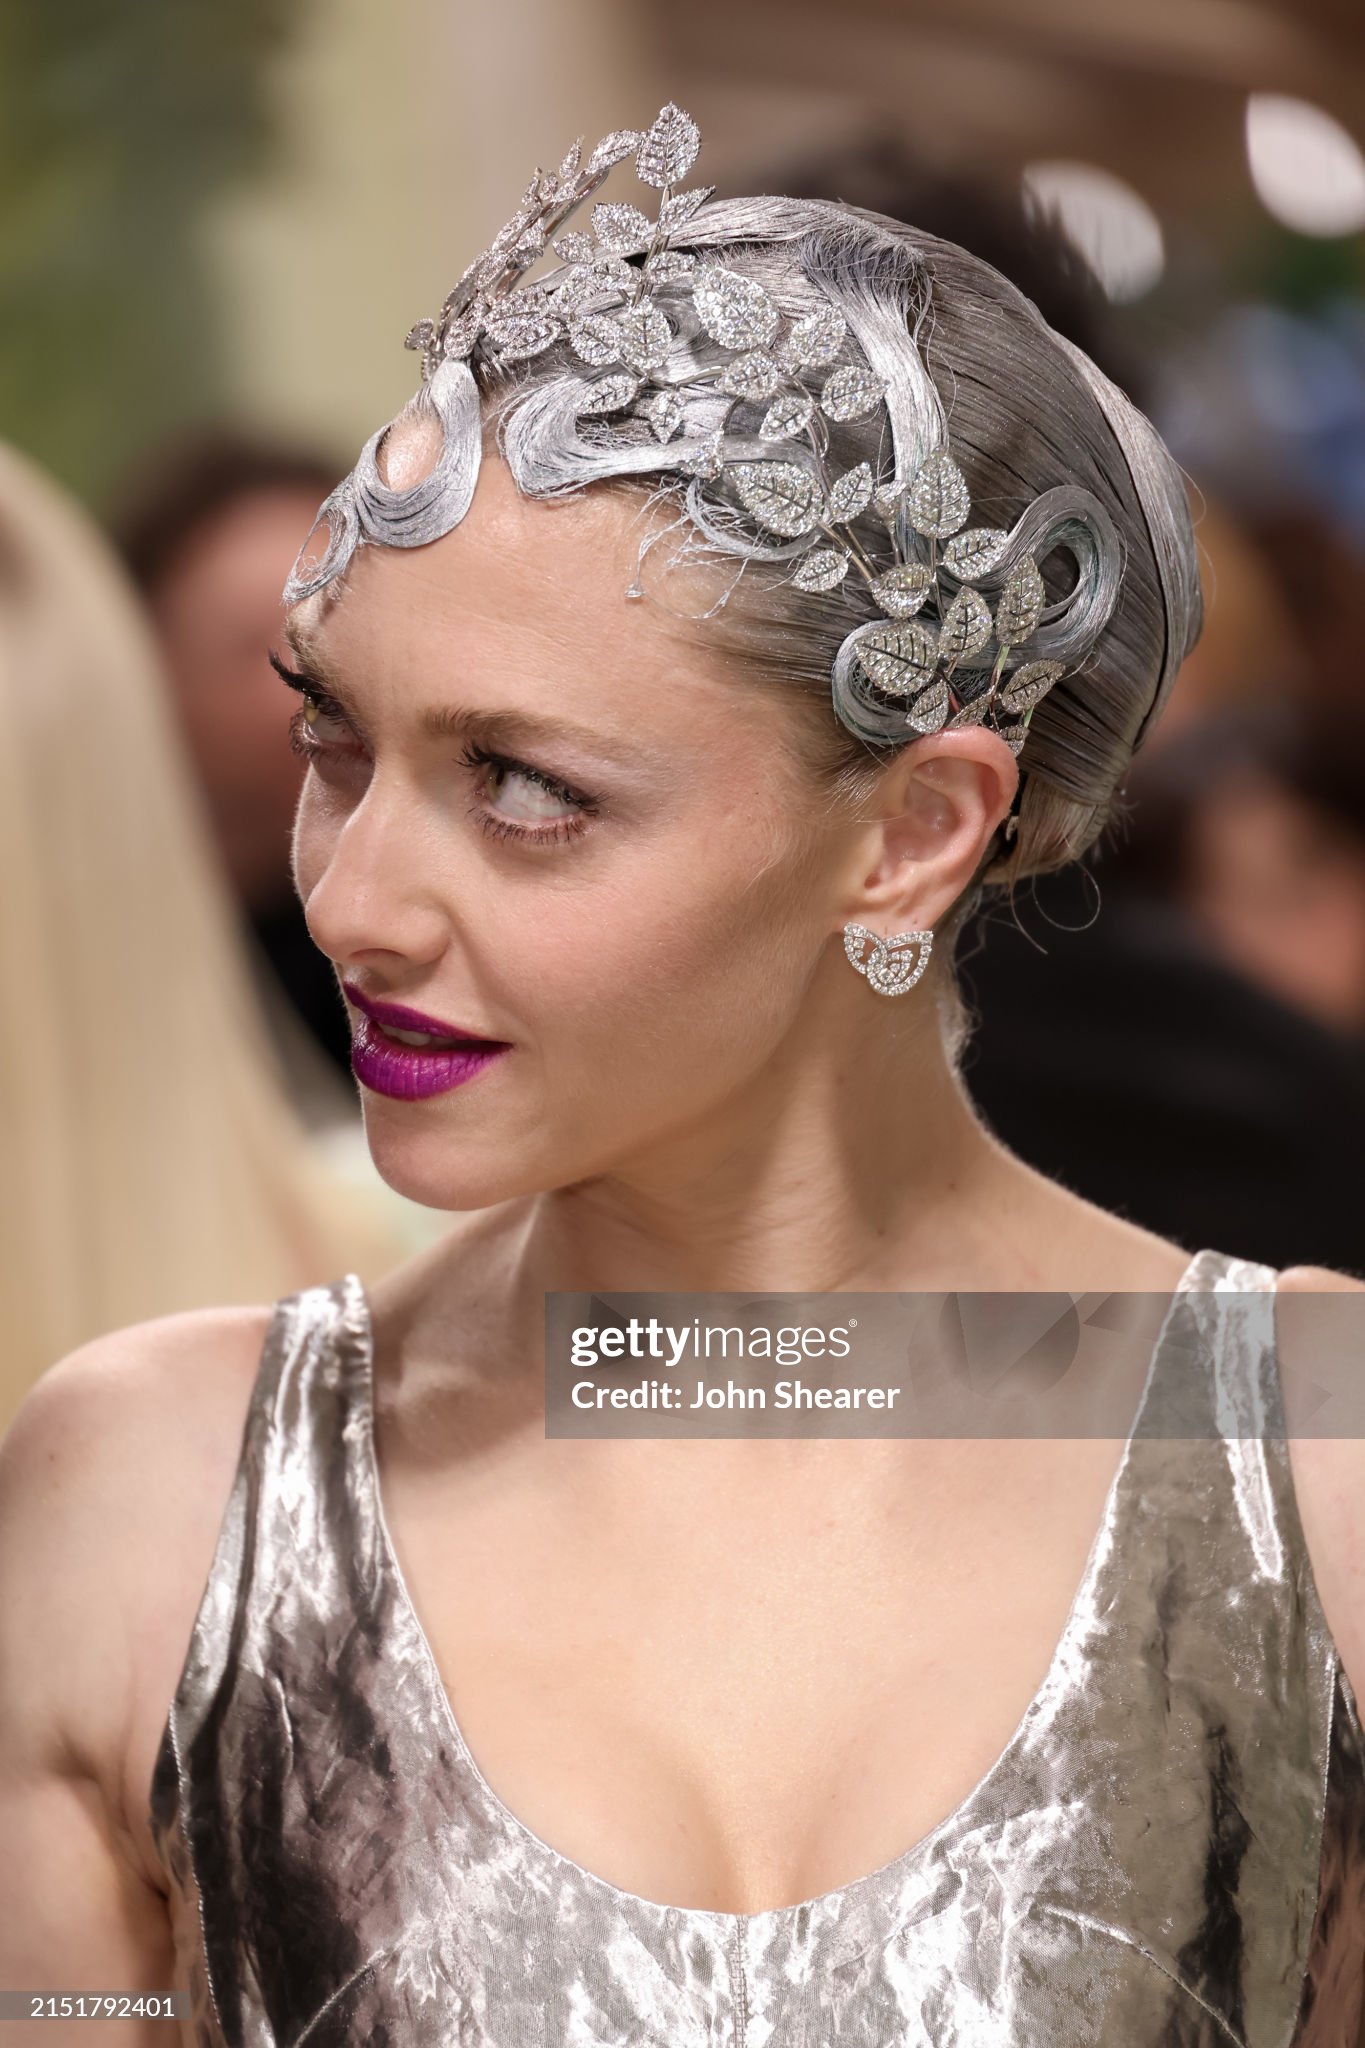 gettyimages-2151792401-2048x2048.jpg